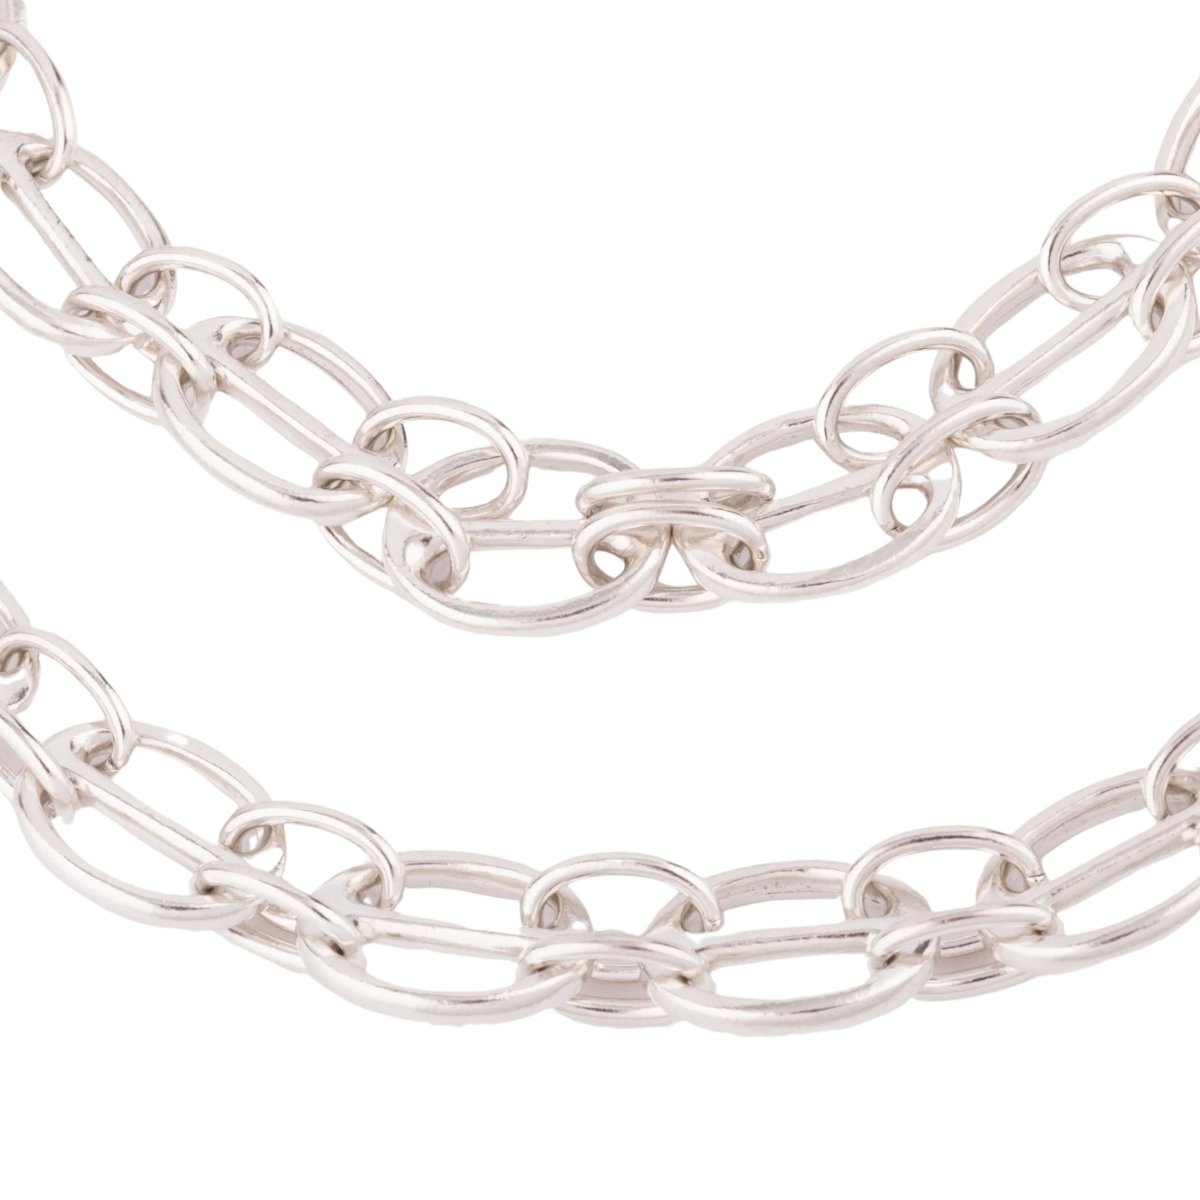 Hermes Farandole Chaine d'Ancre Long Necklace Sterling Silver | Mightychic